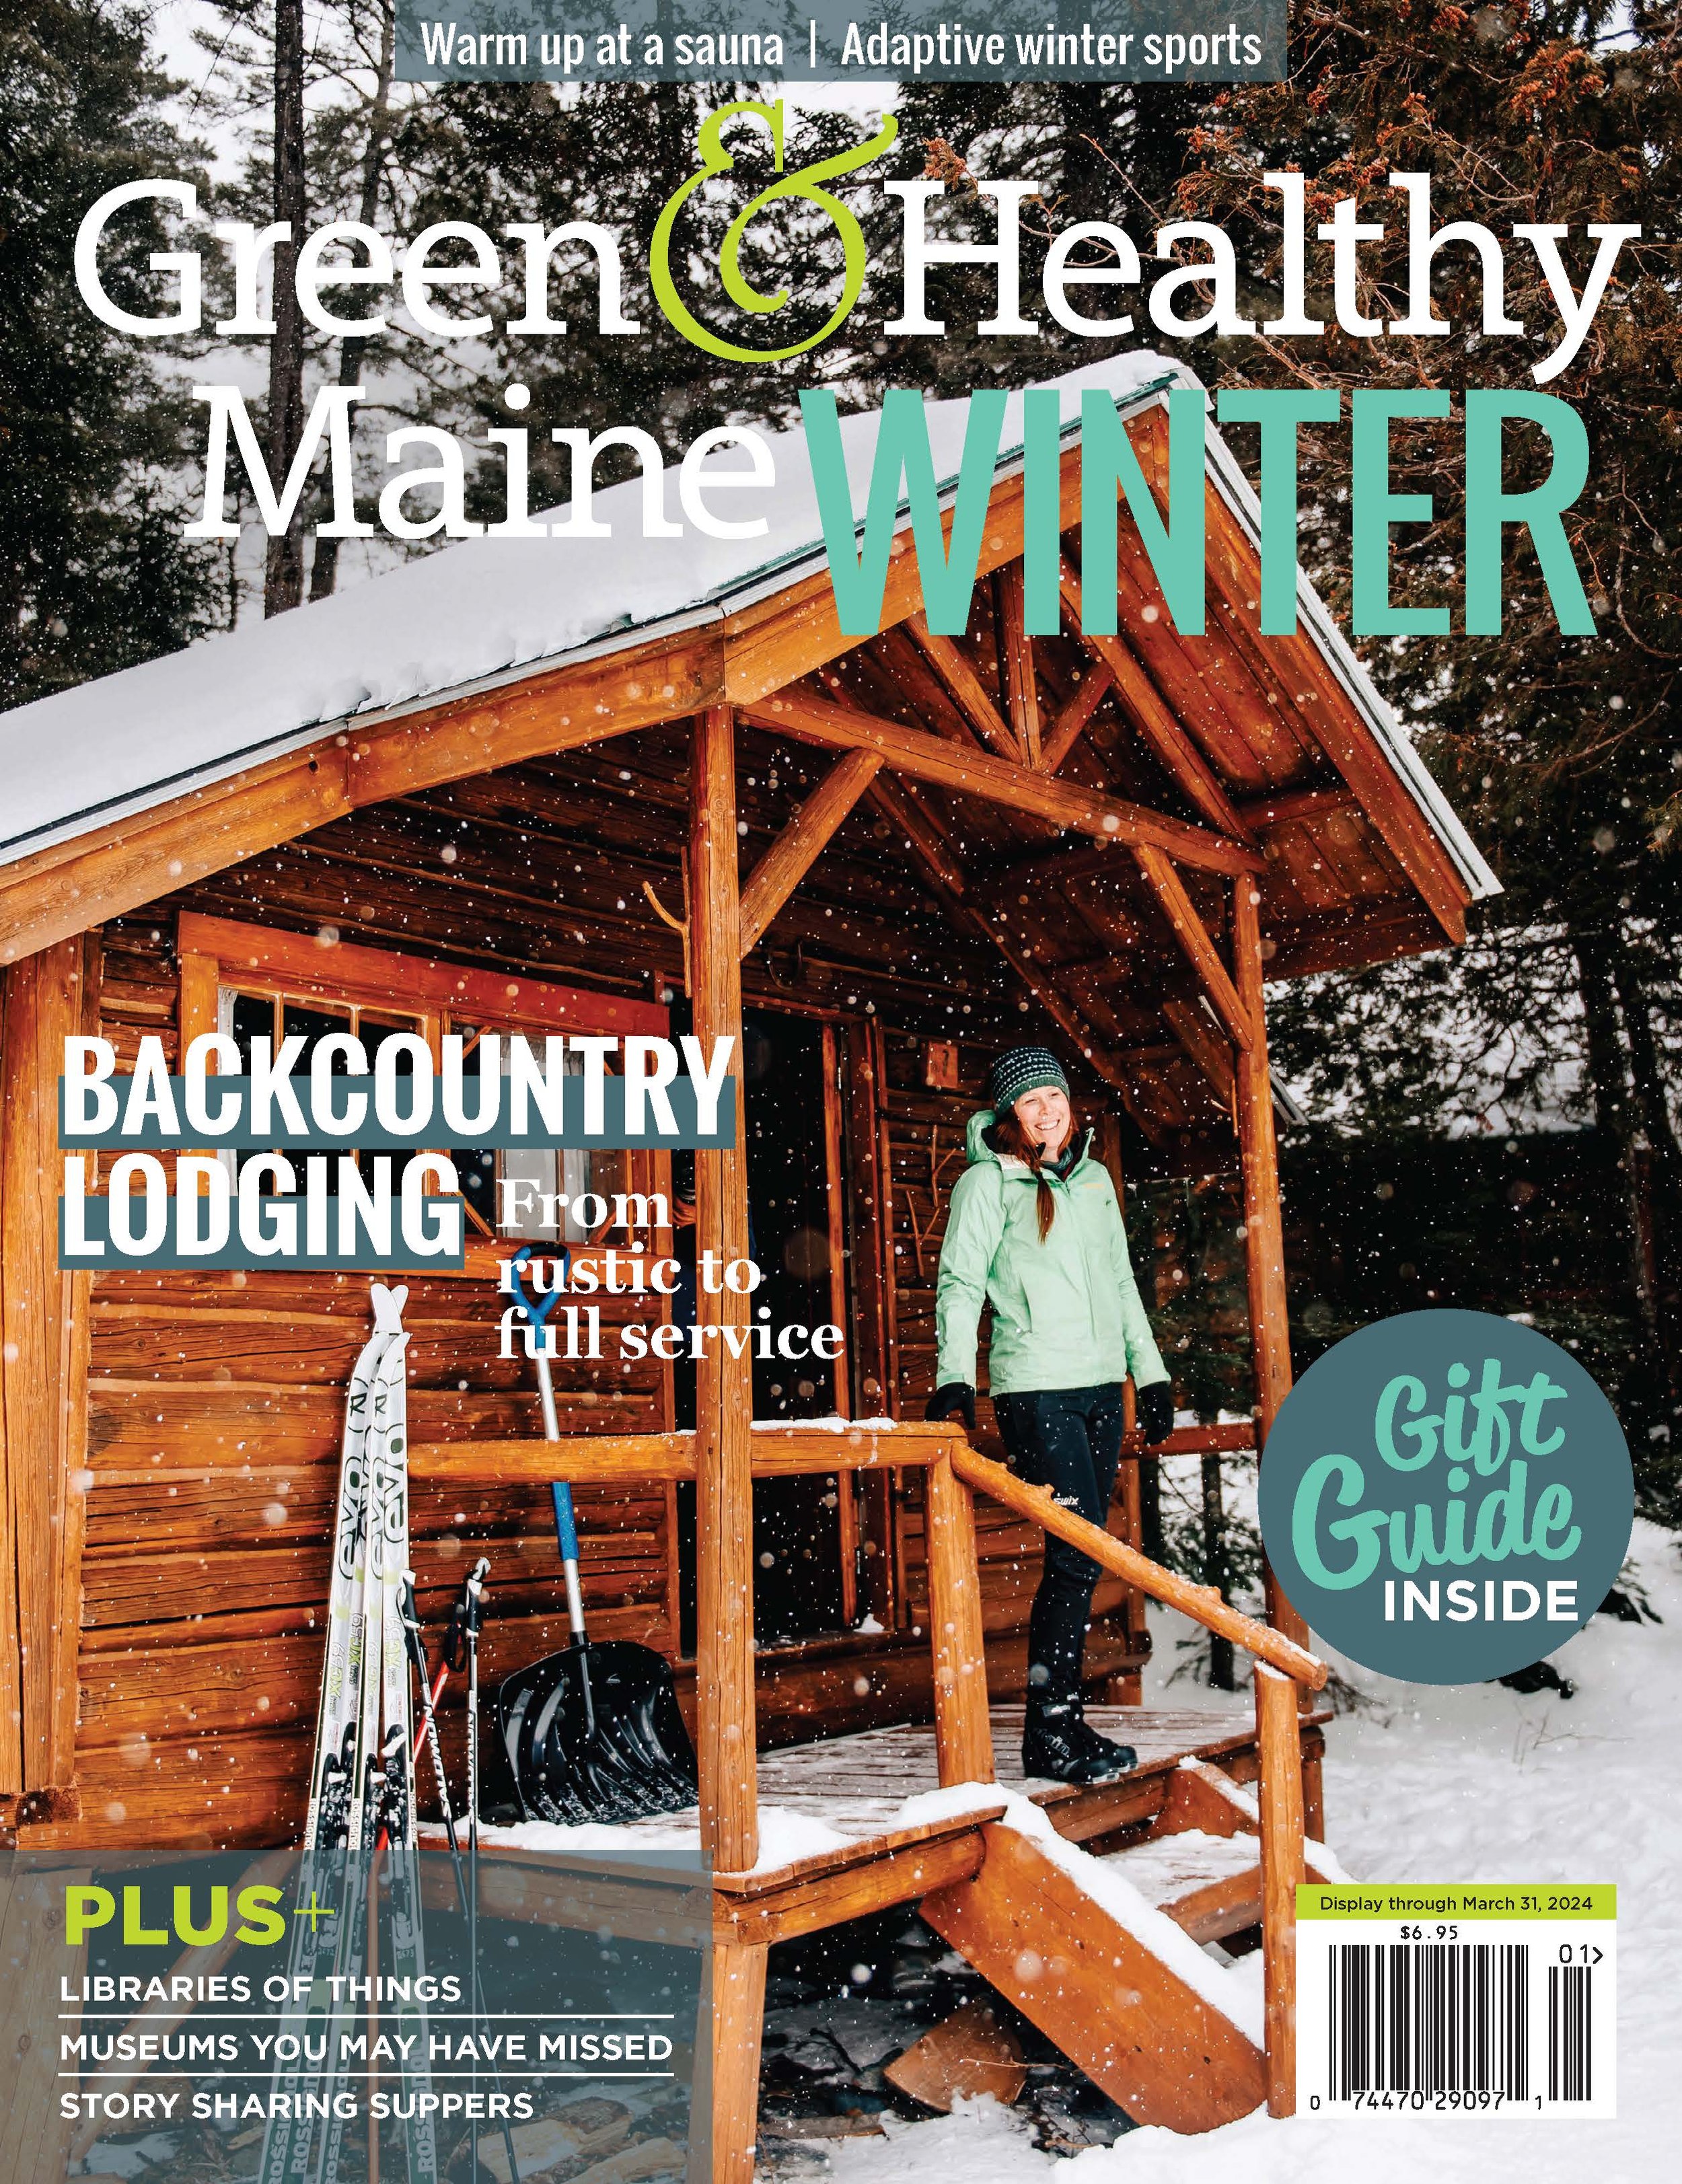 Boothbay in a day  Green & Healthy Maine magazine – Happy, healthy,  sustainable